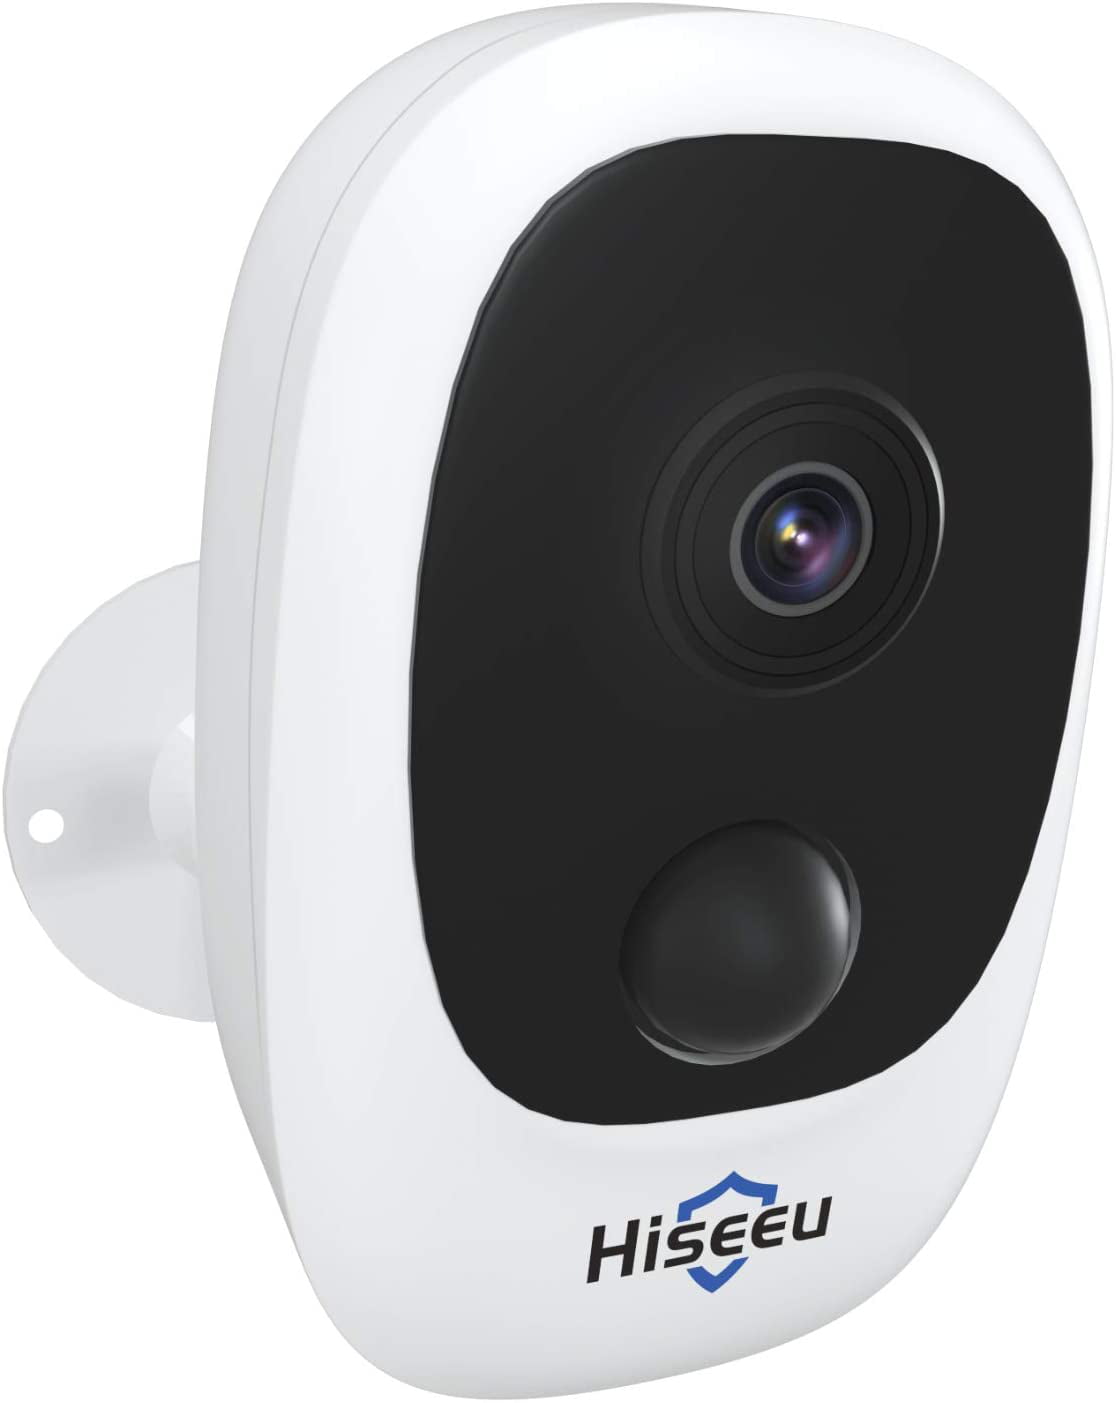 Hiseeu Home Security Camera,Wireless Rechargeable Battery Powered 